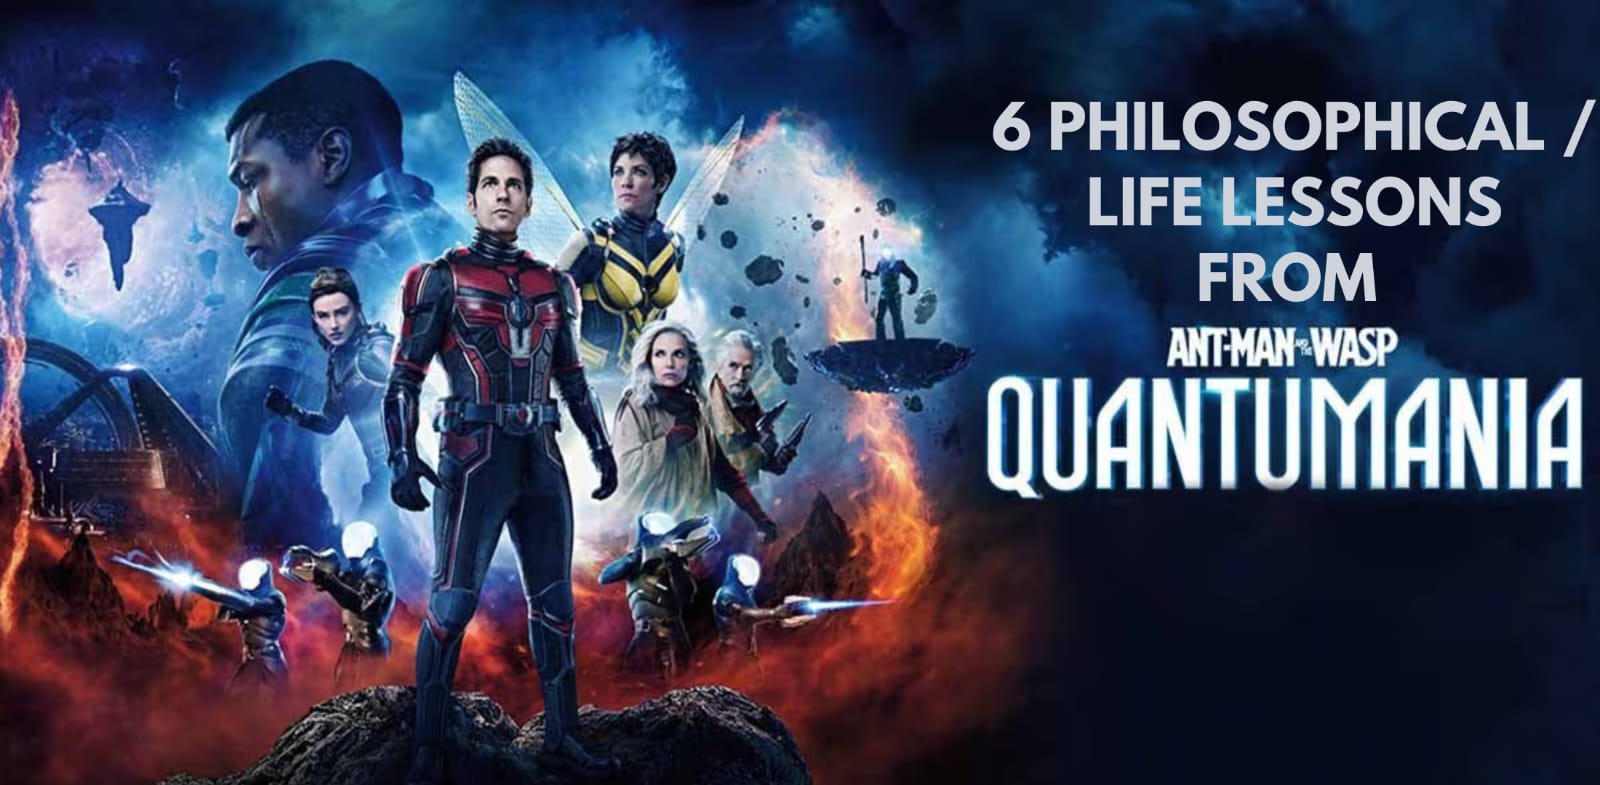 6 philosophical lessons from Ant-Man and the Wasp: Quantumania